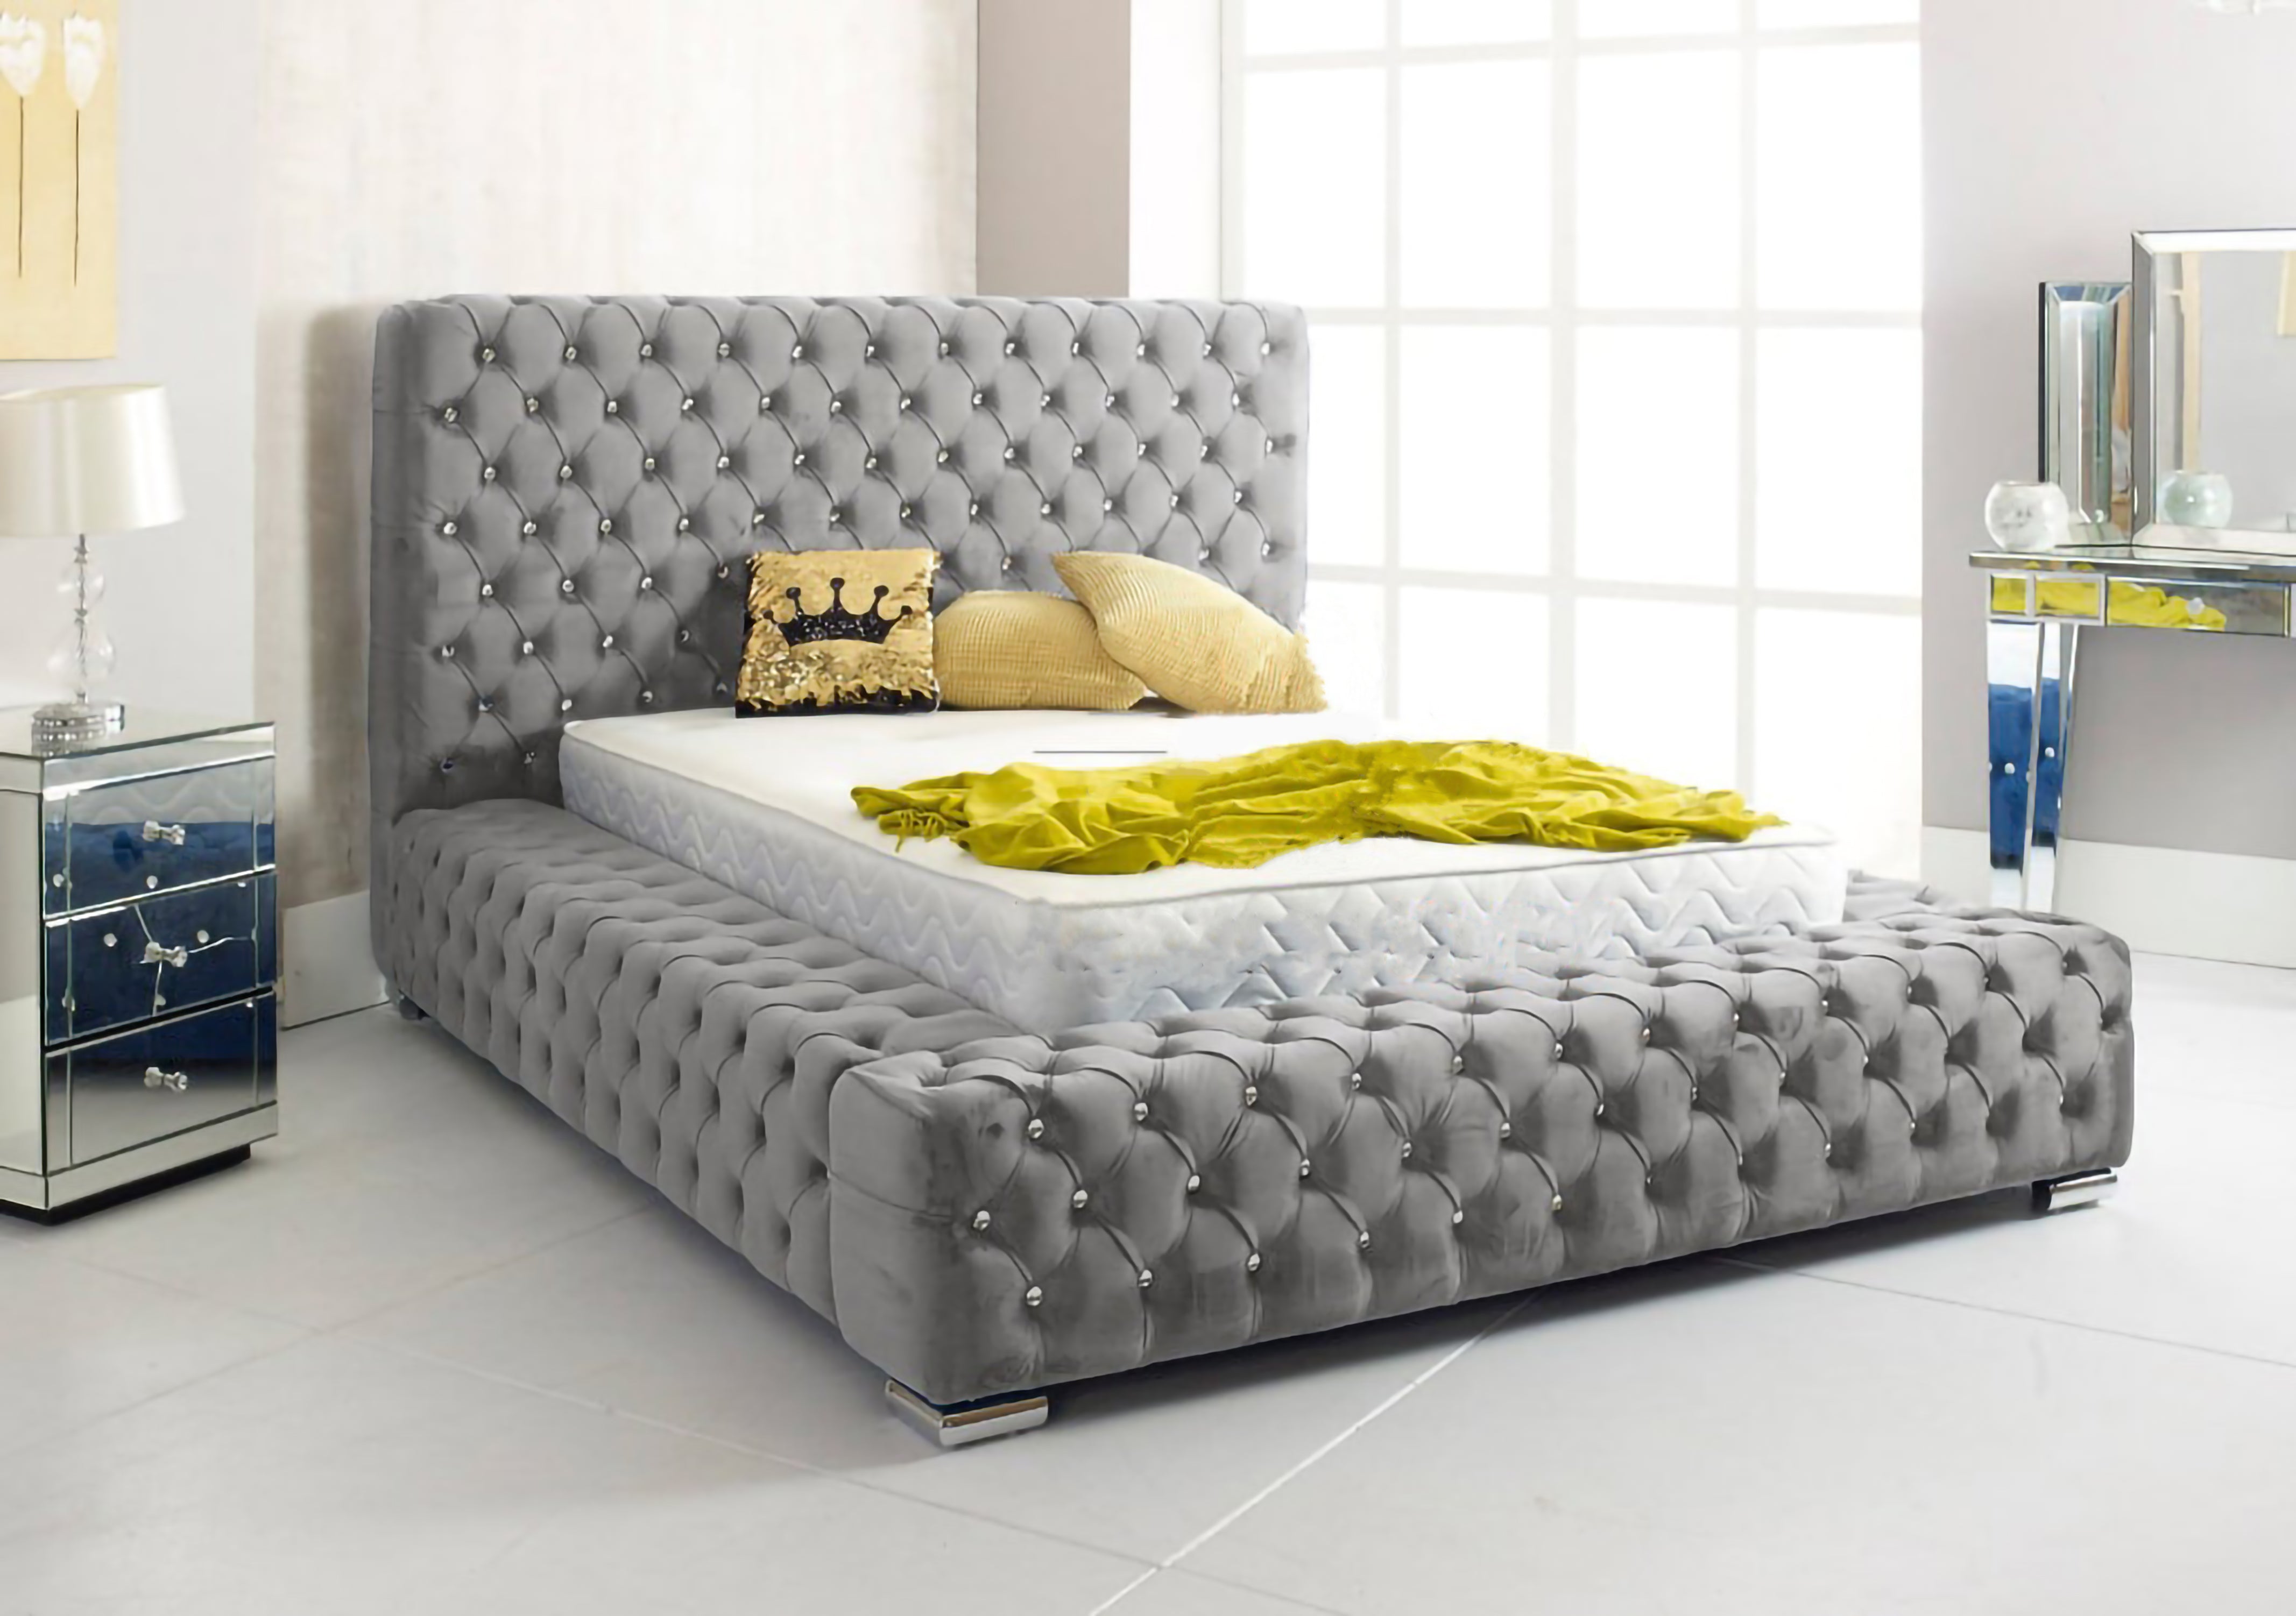 An image of Belgravia Chesterfield Bedframe